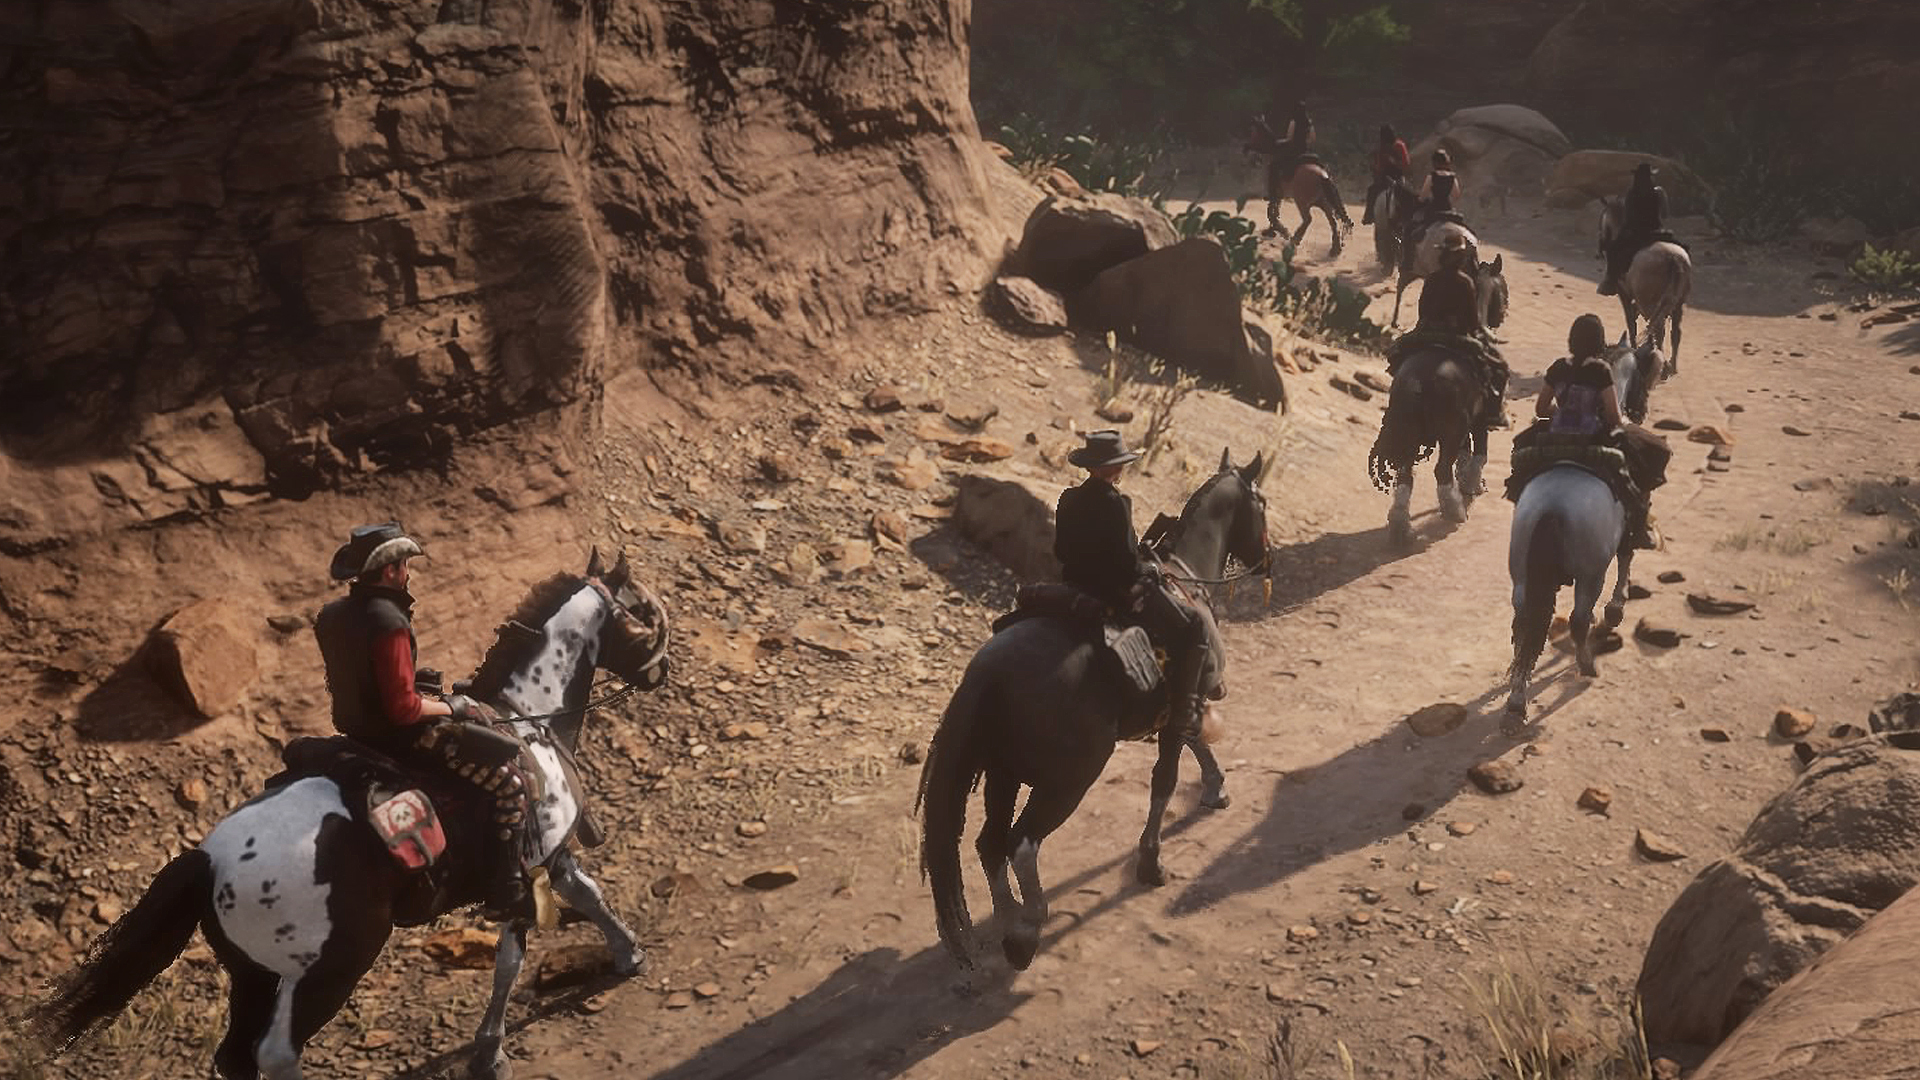 A group of riders and horses in a canon from the Red Dead Redemption 2 video game